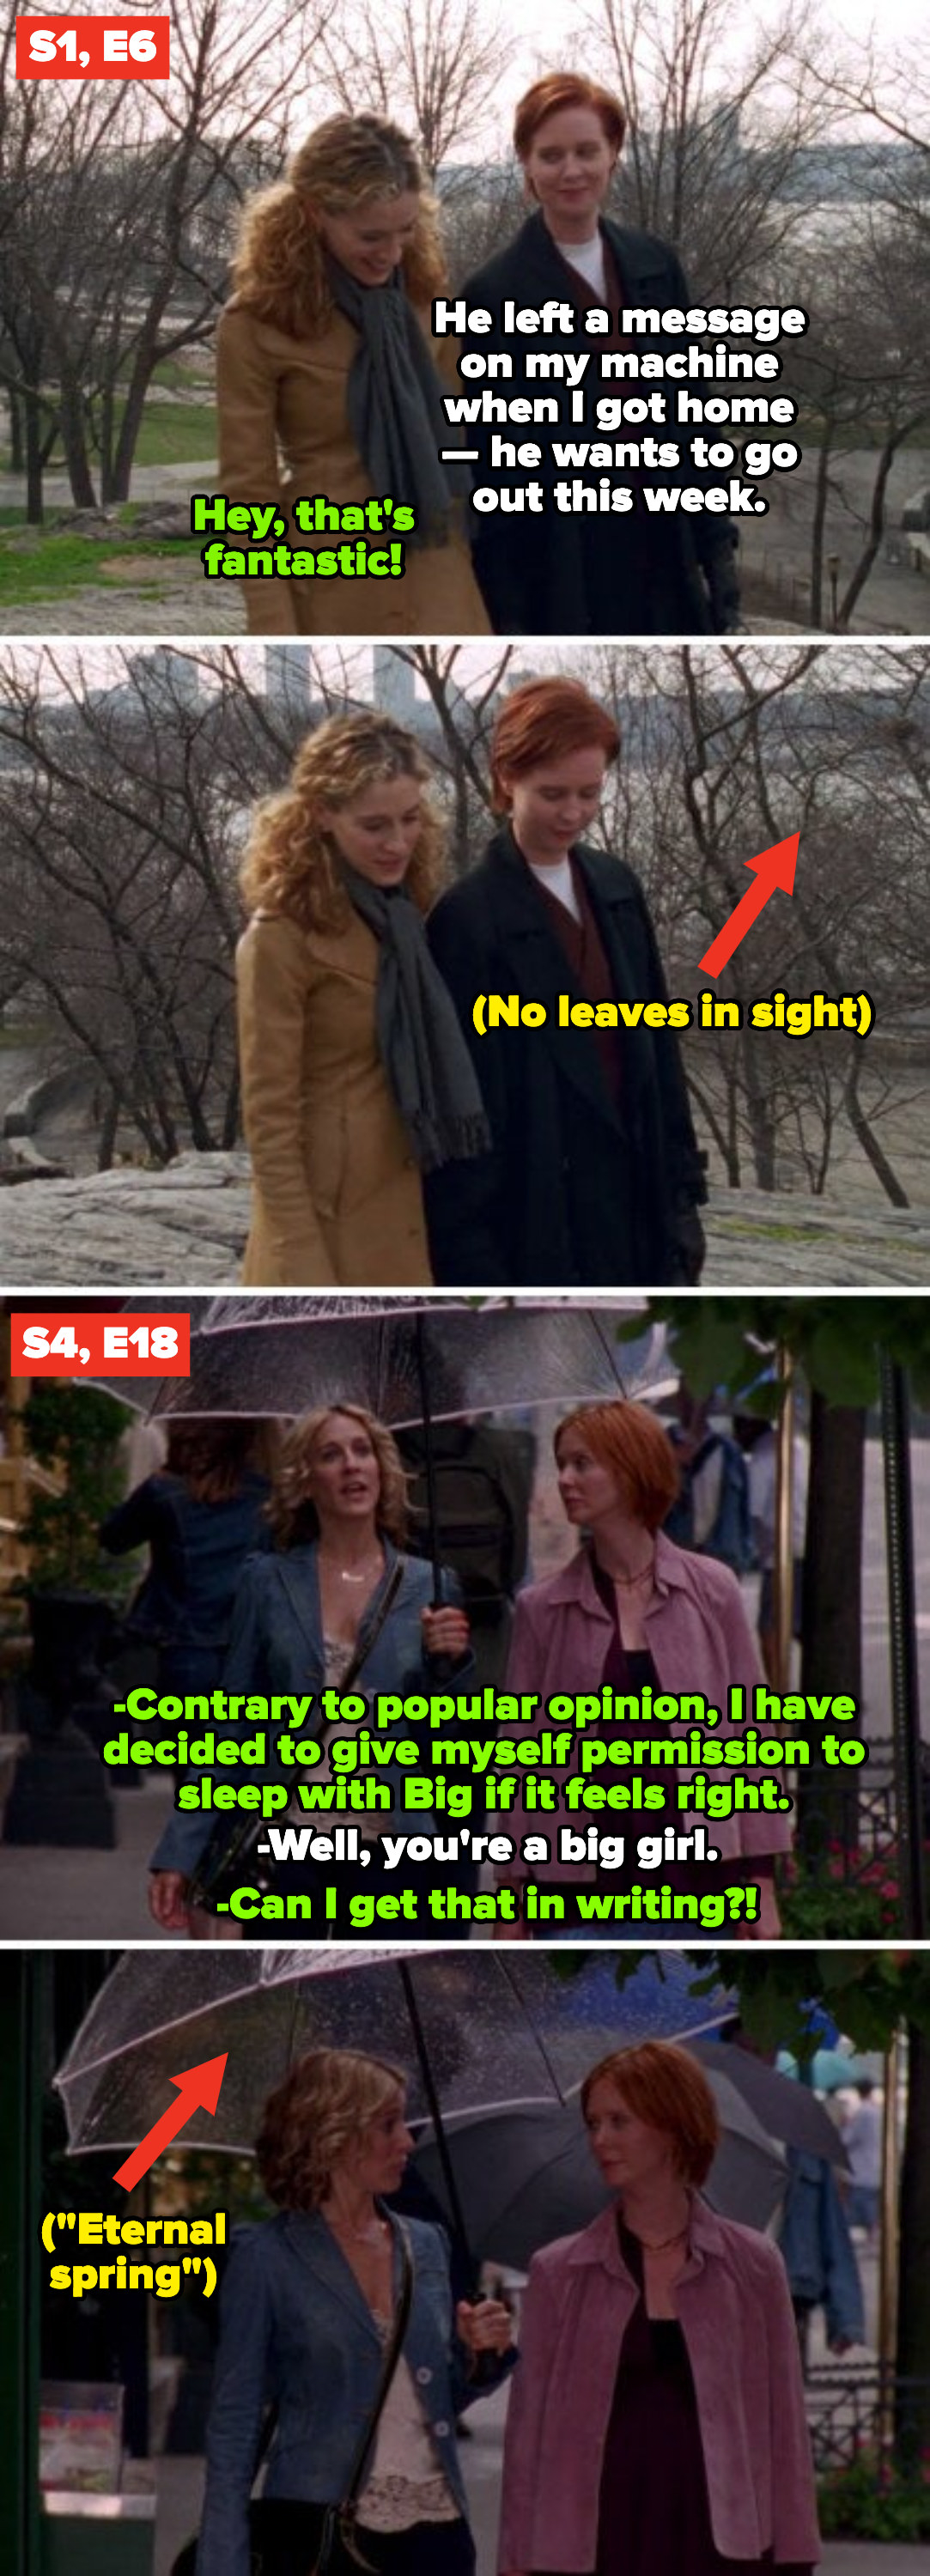 Carrie and Miranda walking in Riverside Park in S1, E6, aka winter; Carrie and Miranda walking around the city in S4, E18, aka &quot;Eternal spring&quot;